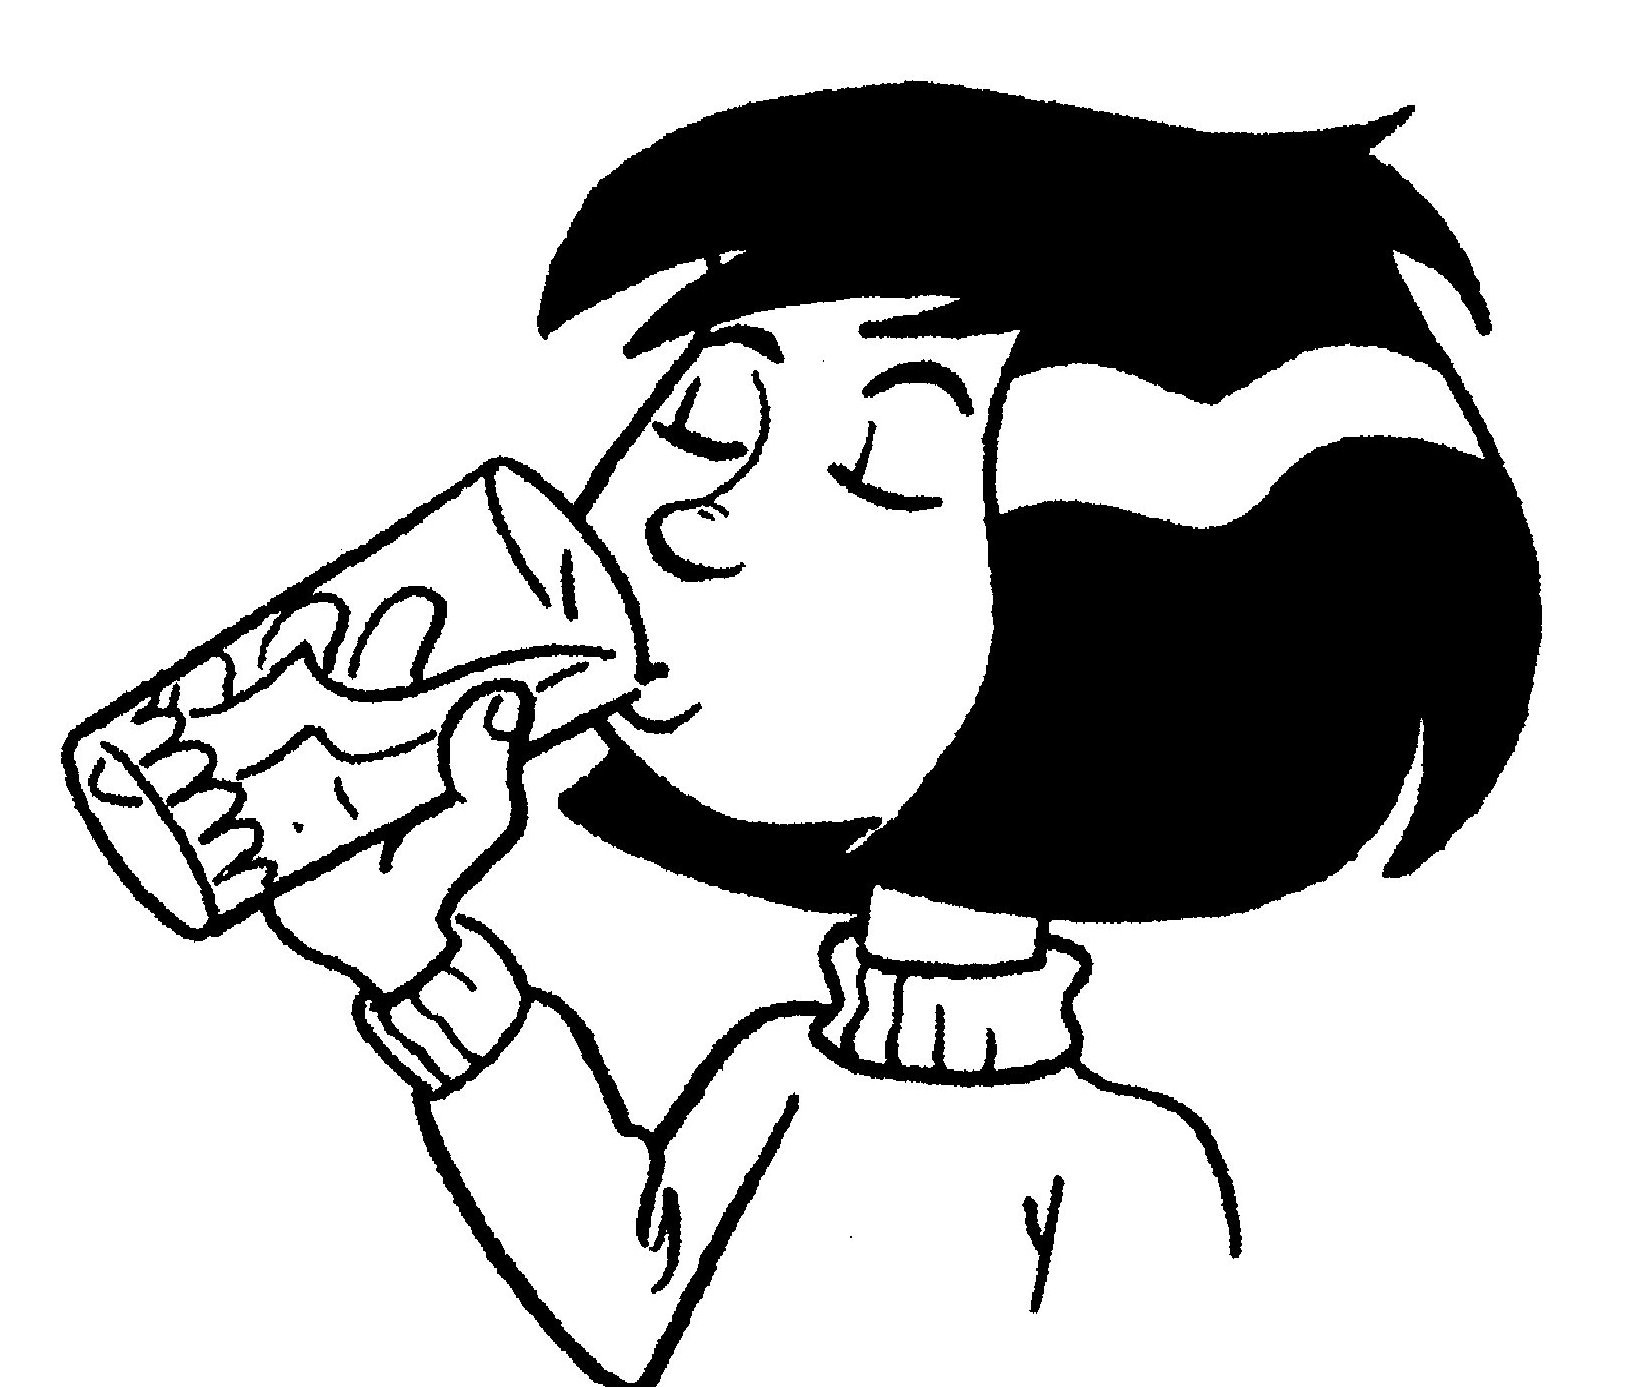 Man drinking from milk jug black and white clipart 